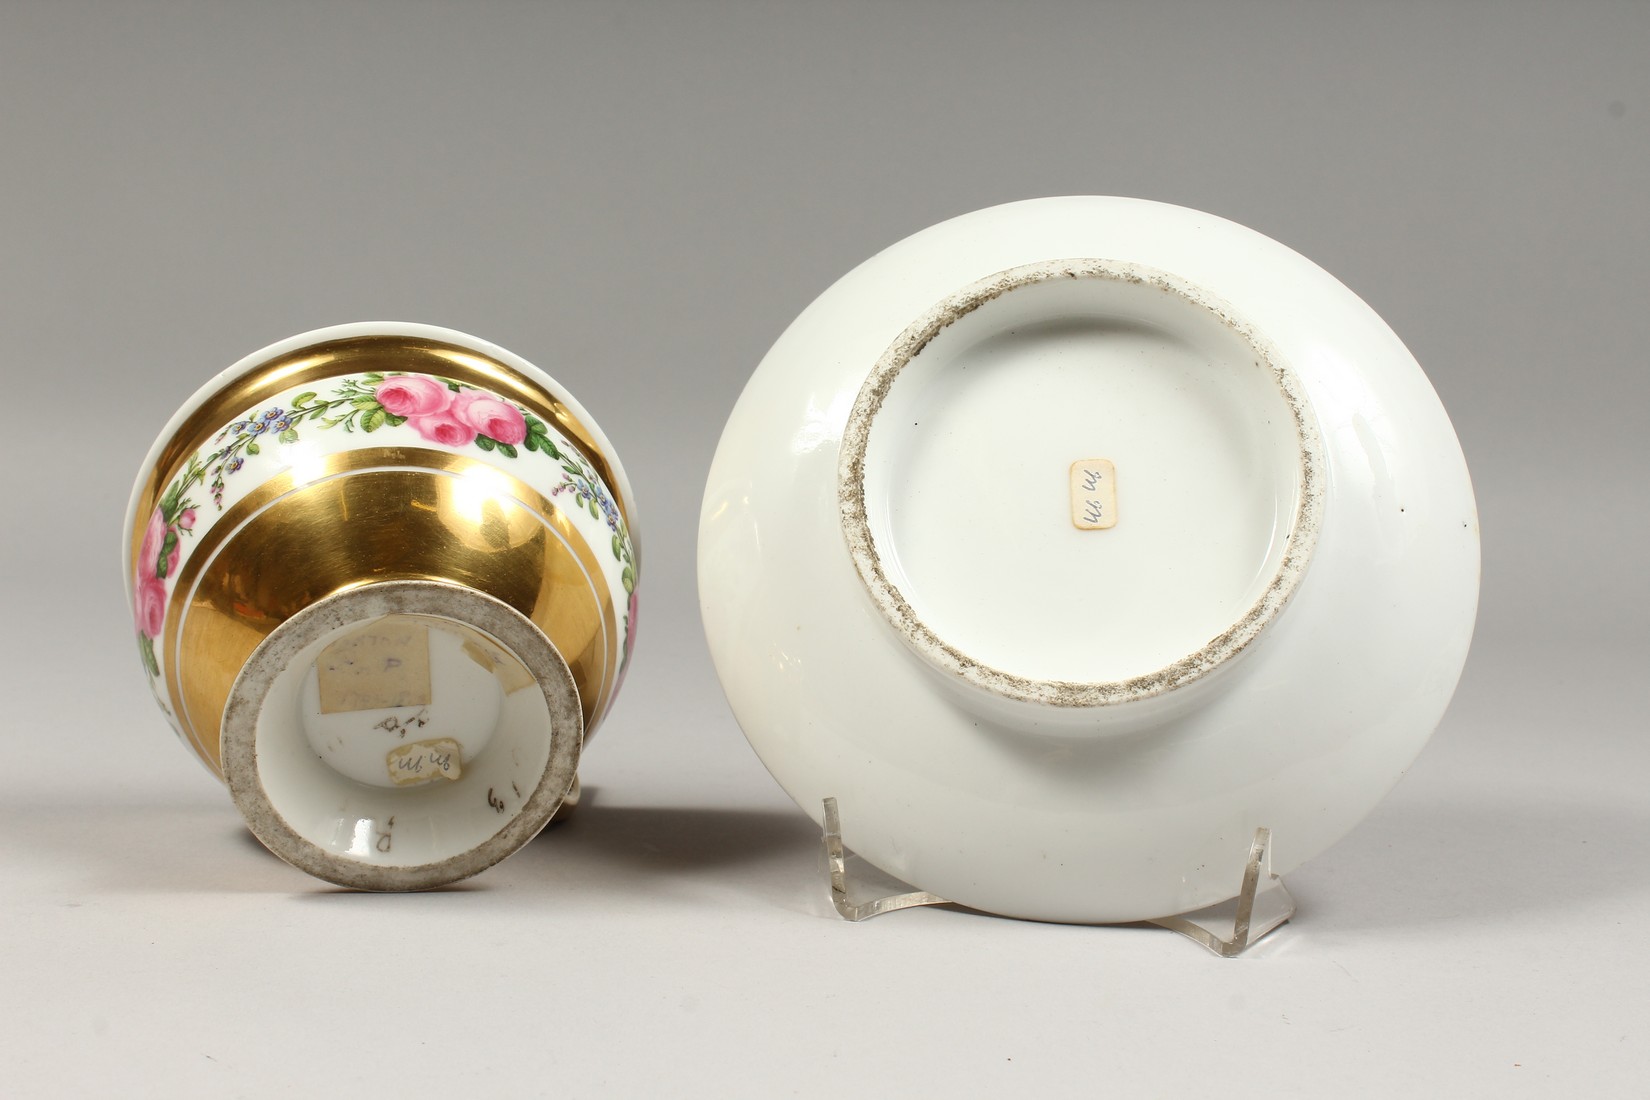 A LARGE PARIS PORCELAIN CUP AND SAUCER, with gilt and floral bands. - Image 5 of 6